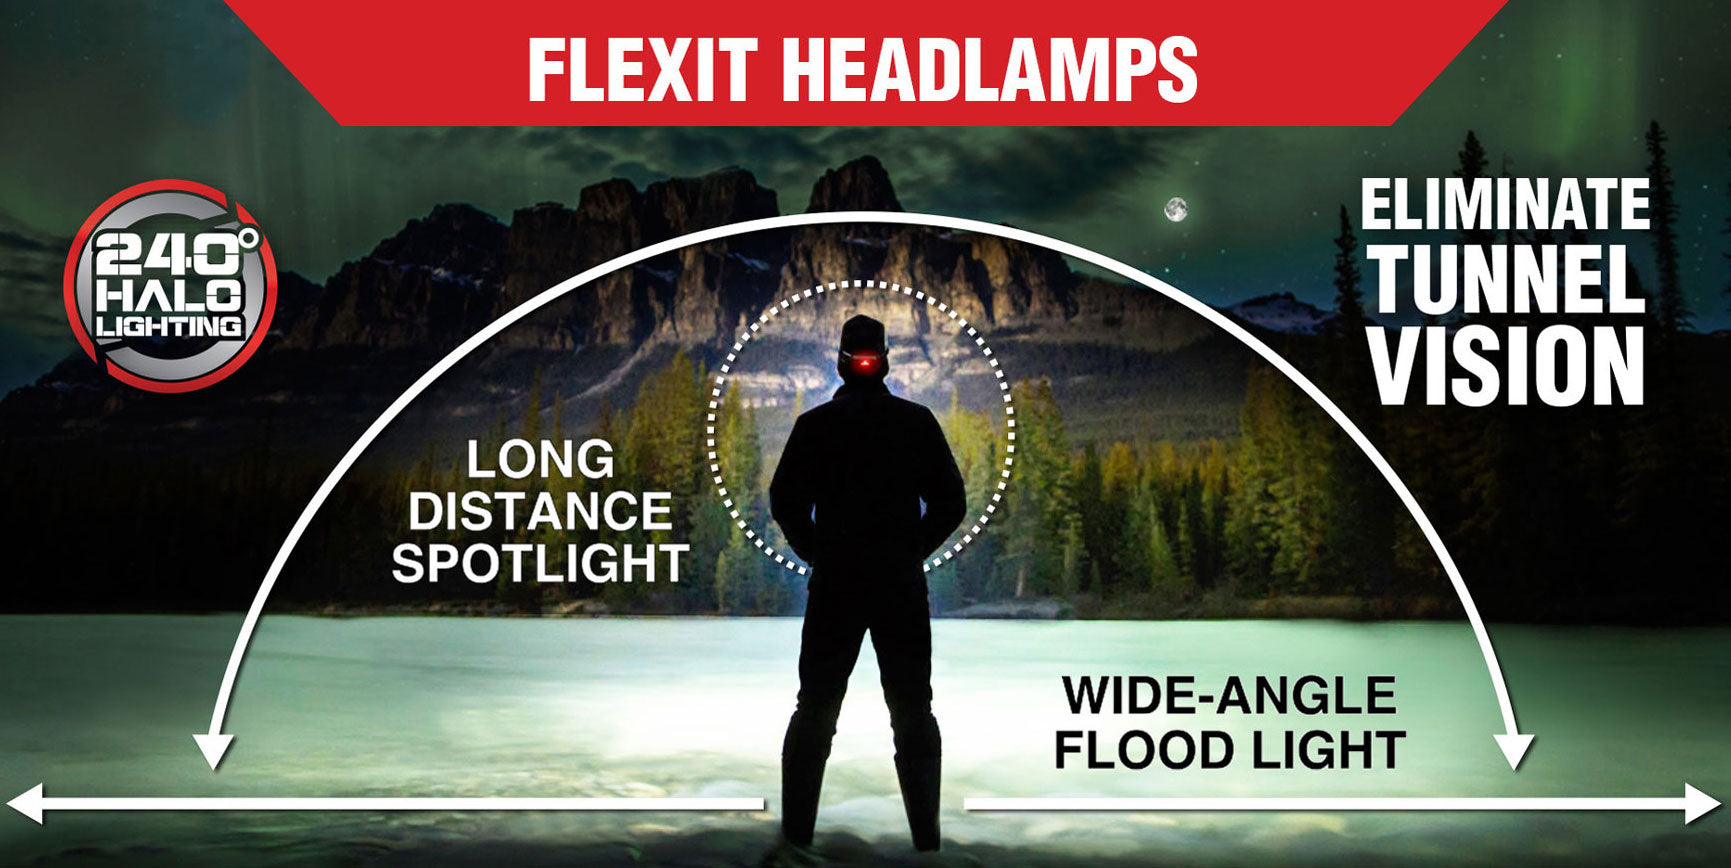 FLEXIT headlamp poster showing the silhouette of a person looking out over a mountainous scene with long distance spotlight and wide-angle floodlighting showing off our 240 degree halo lighting